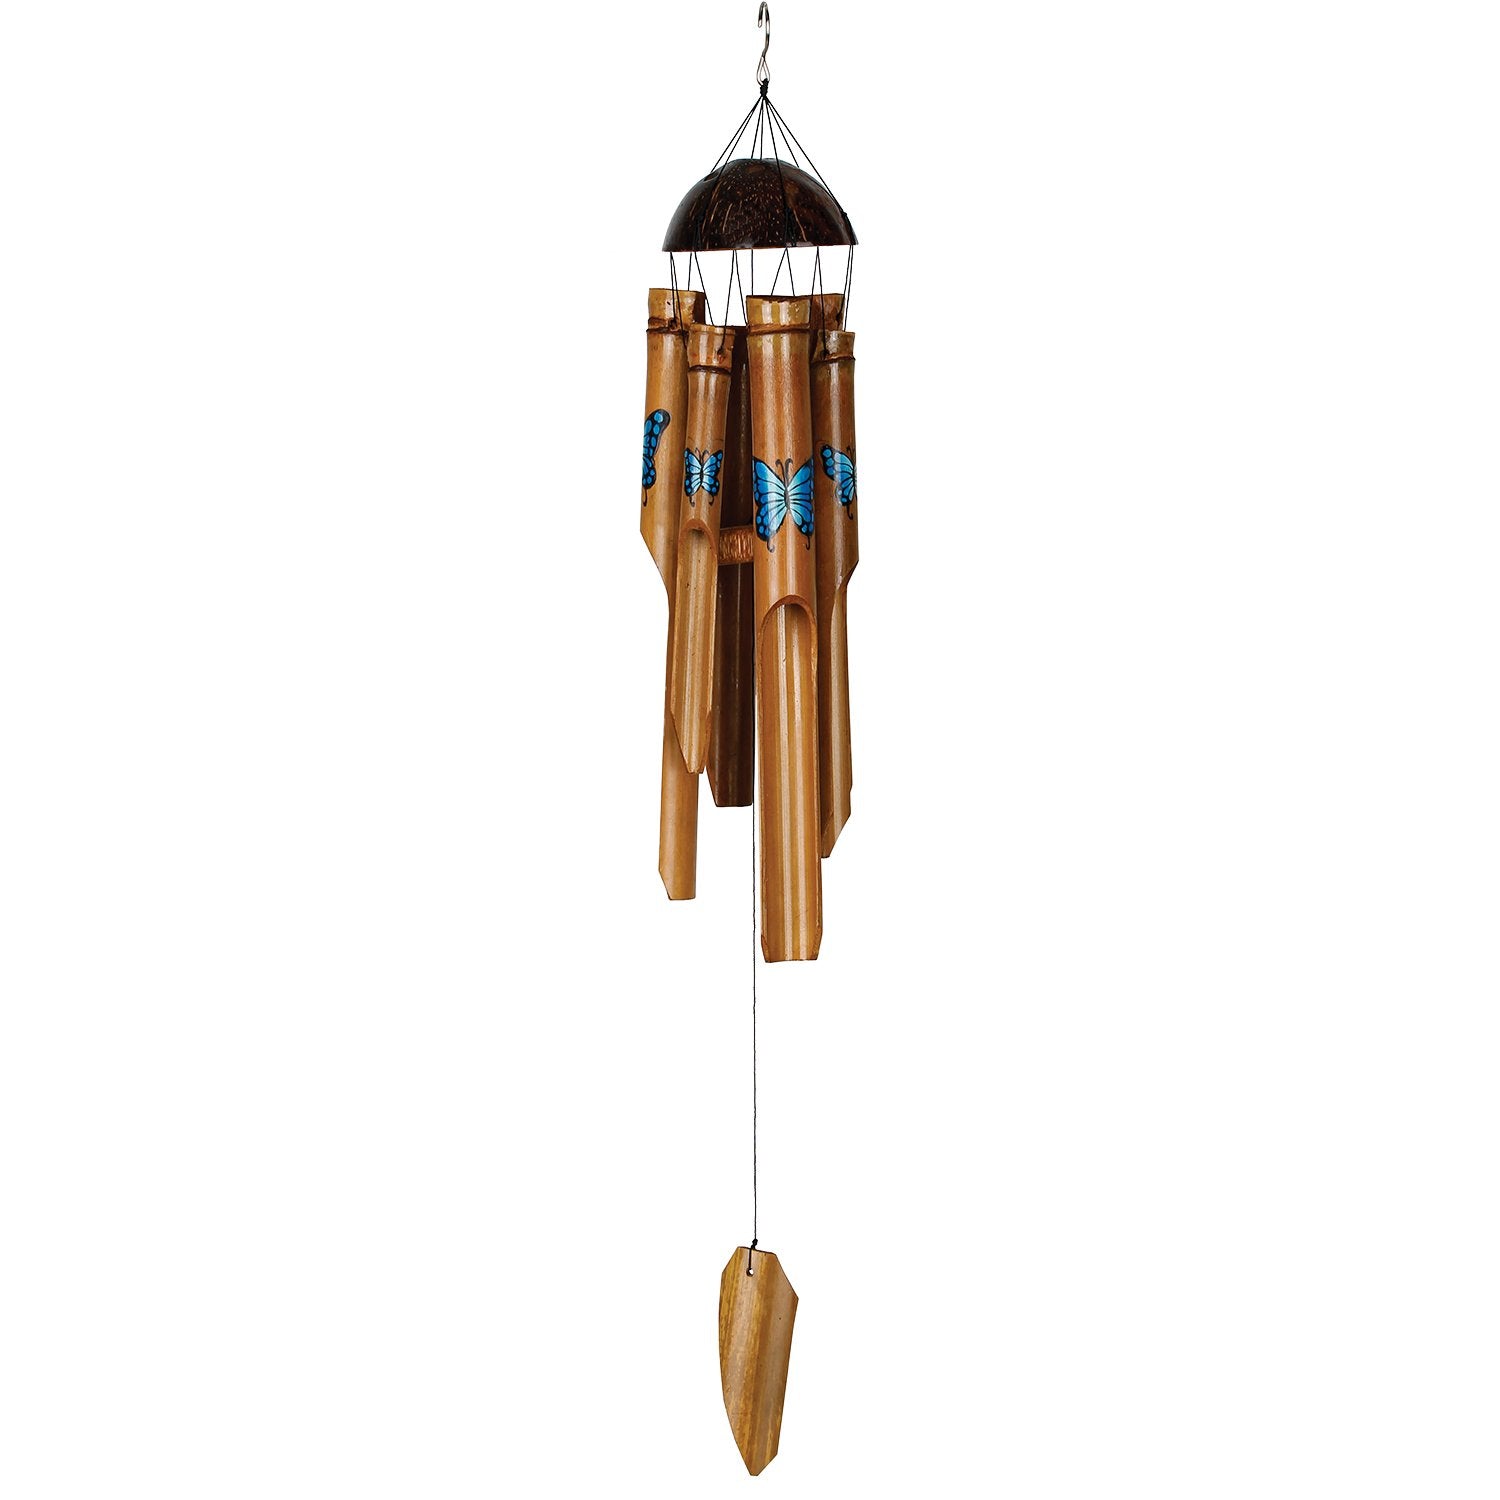 Butterfly Bamboo Chime - Blue full product image